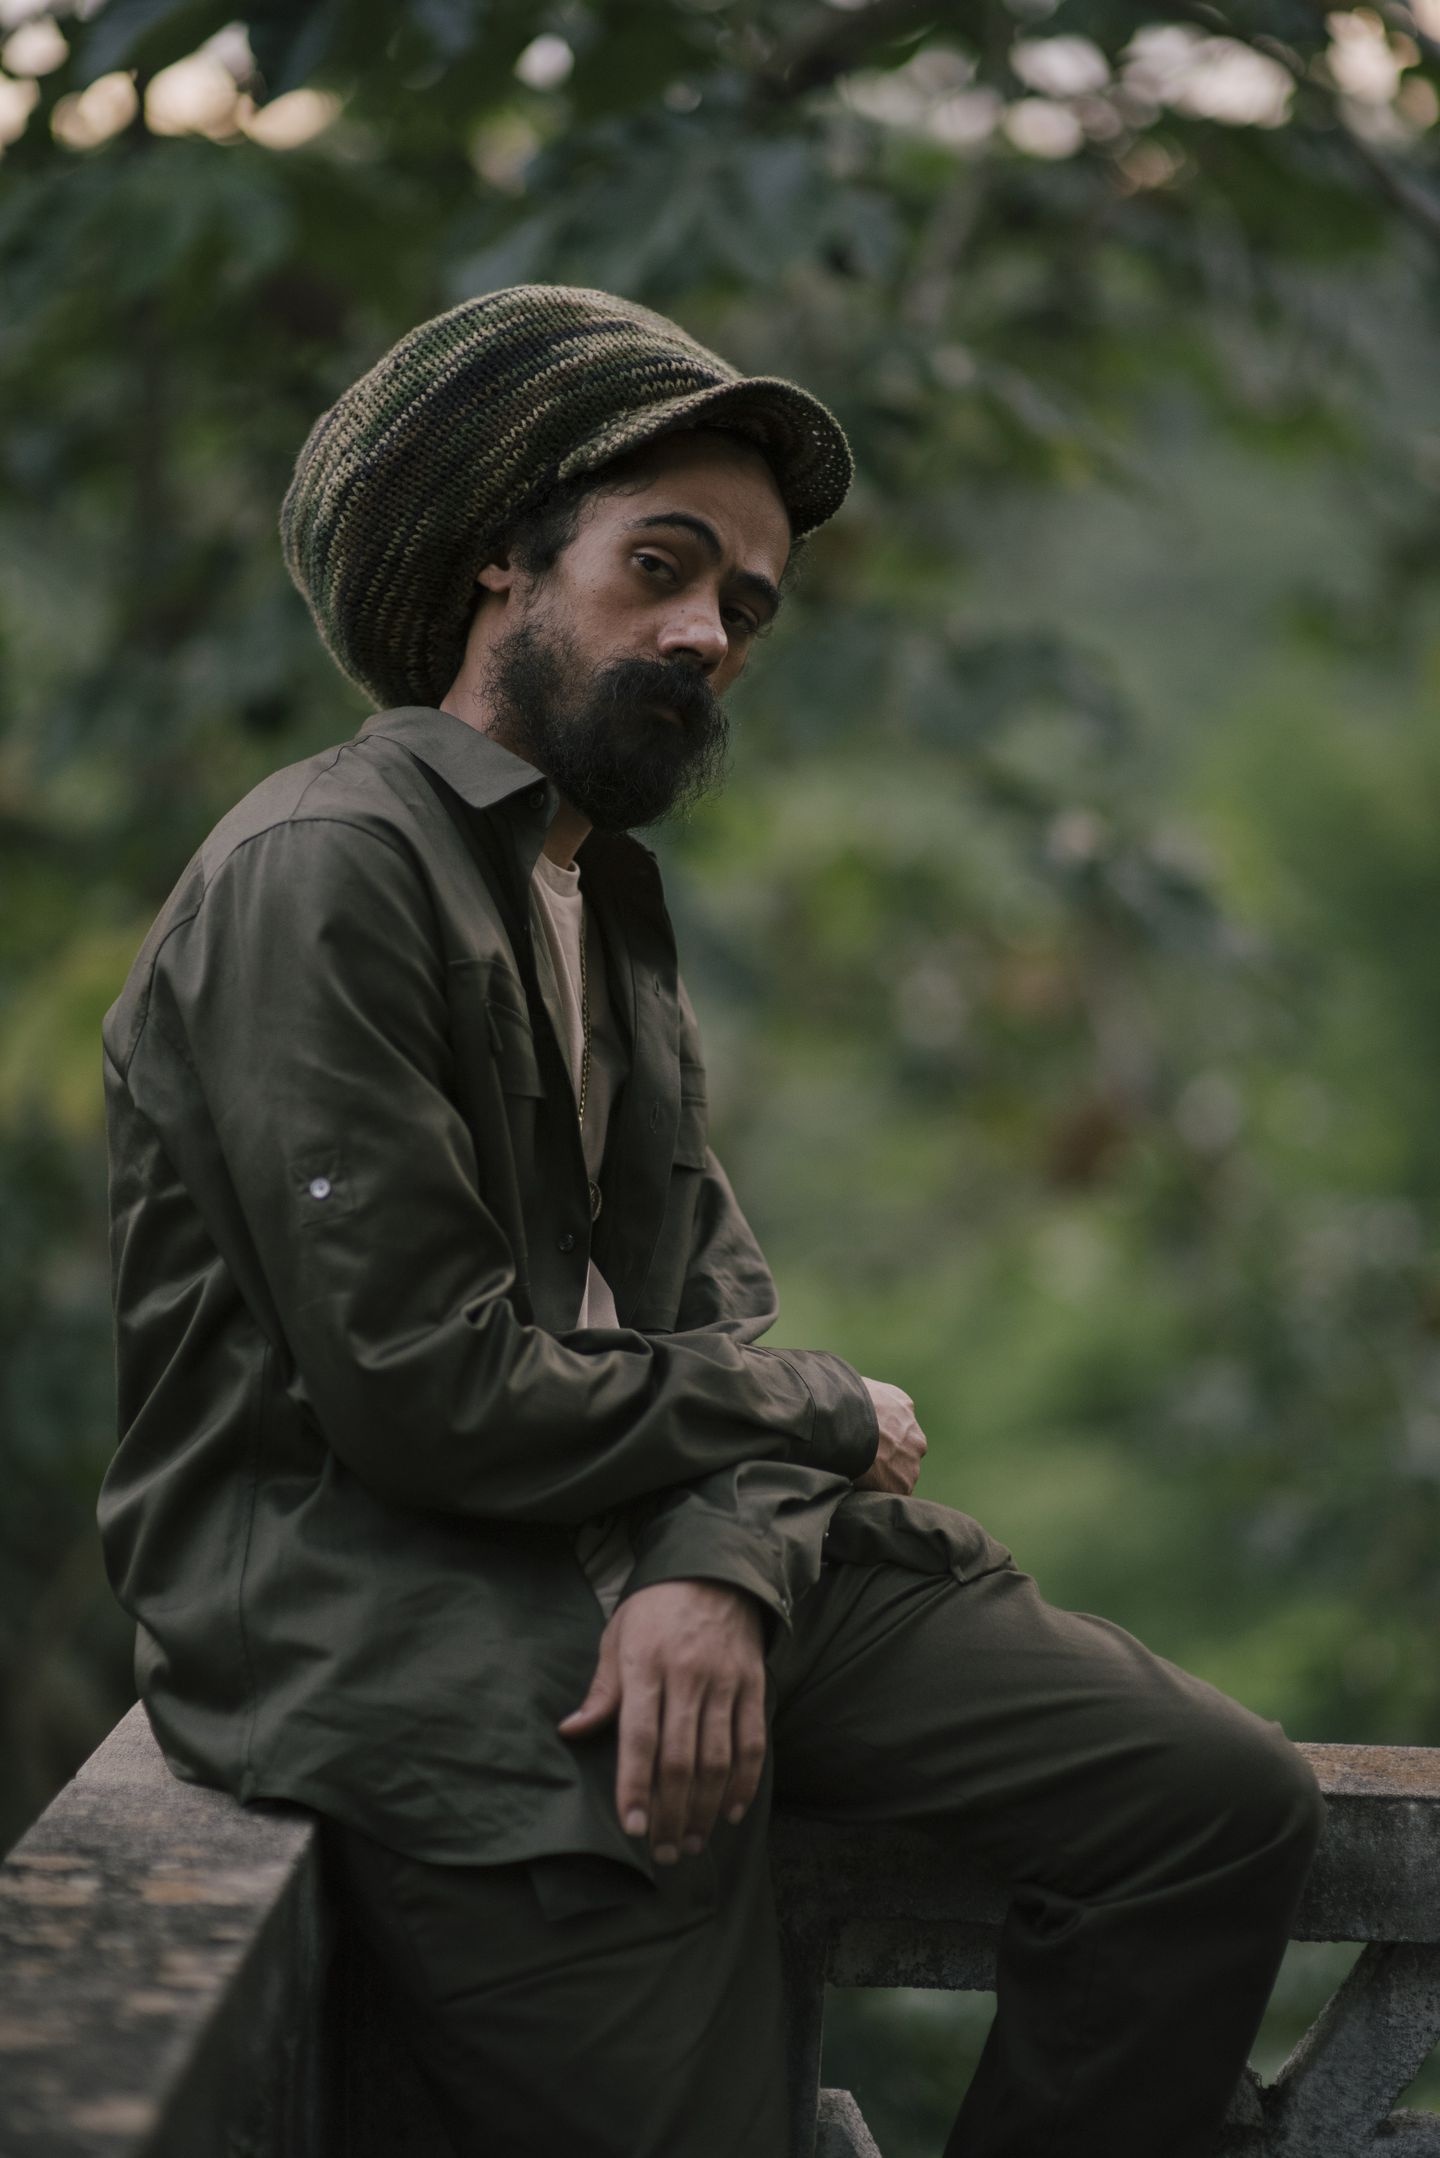 HD wallpaper, Iconic Artist, Jamaican Roots, Phone Hd Damian Marley Background, 1440X2160 Hd Phone, Damian Marley, Music Legend